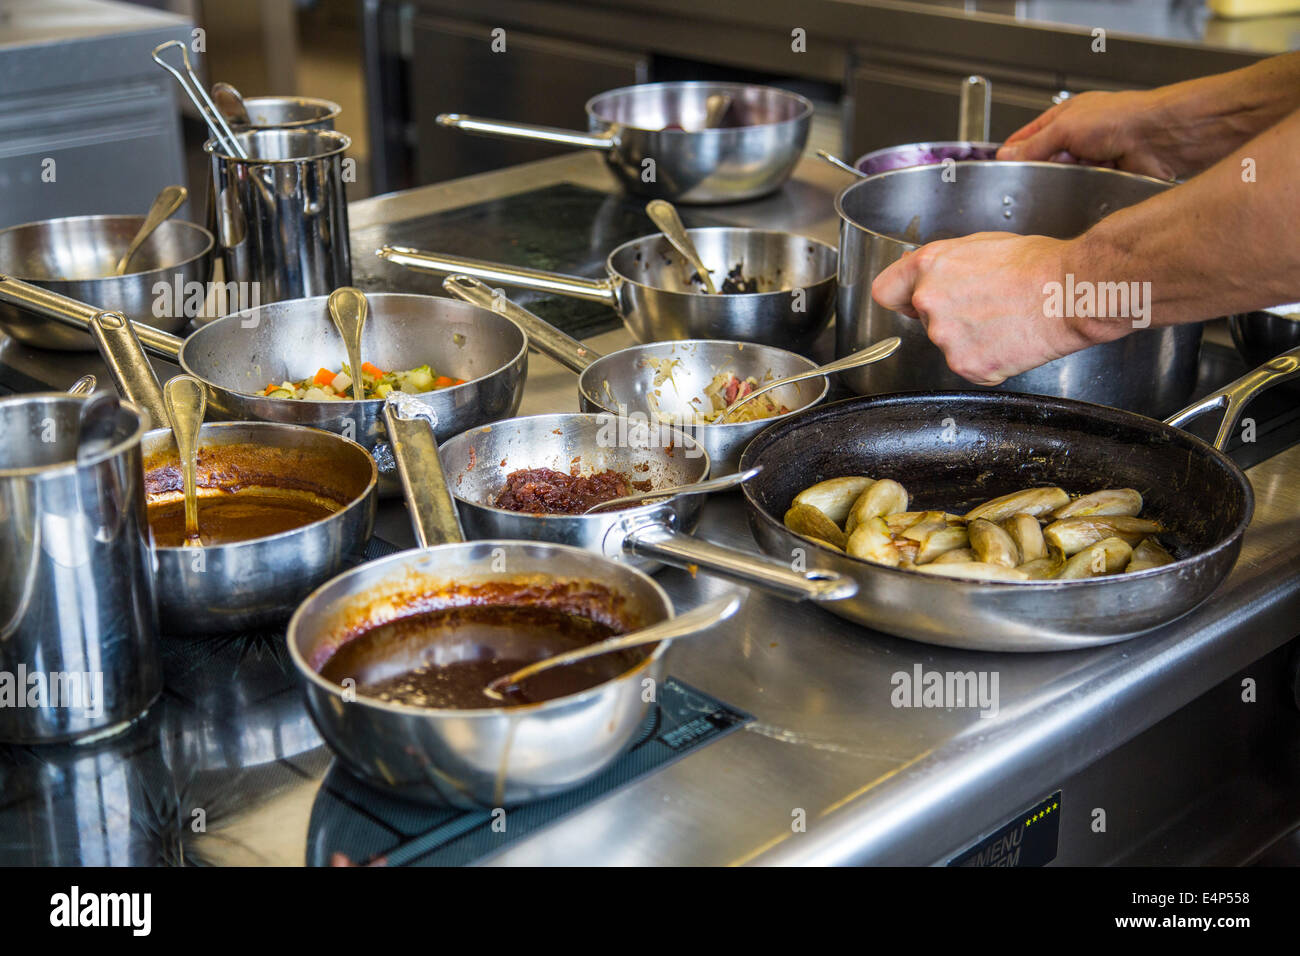 Kitchen of a restaurant, cooking pans and pots on an kitchen stove Stock Photo